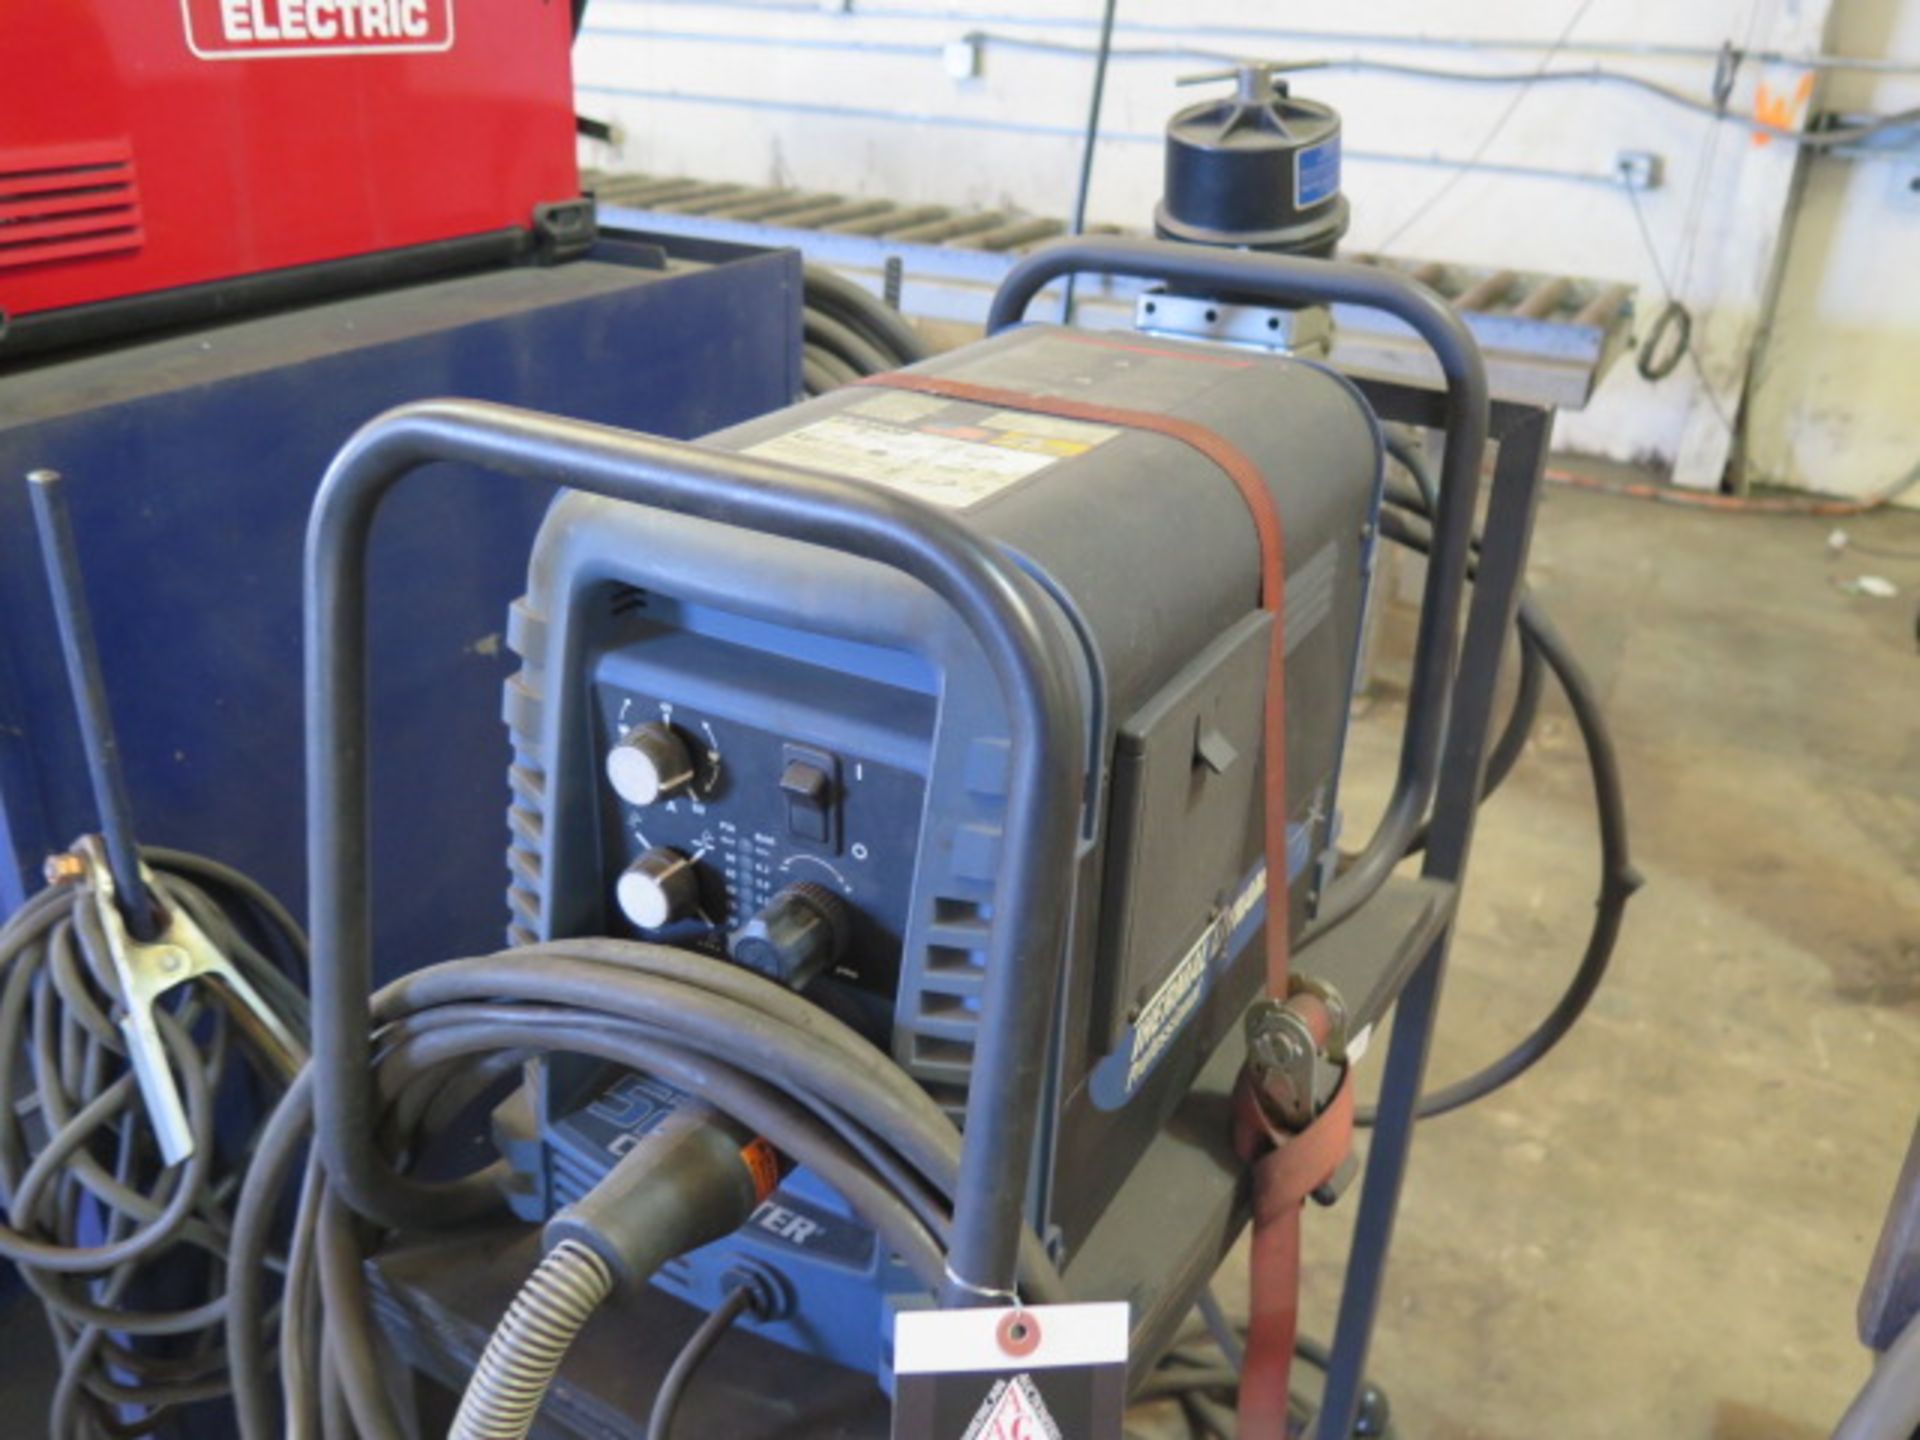 Thermal Dynamics Cutmaster 52 Plasma Cutting Power Source w/ Cart (SOLD AS-IS - NO WARRANTY) - Image 2 of 8